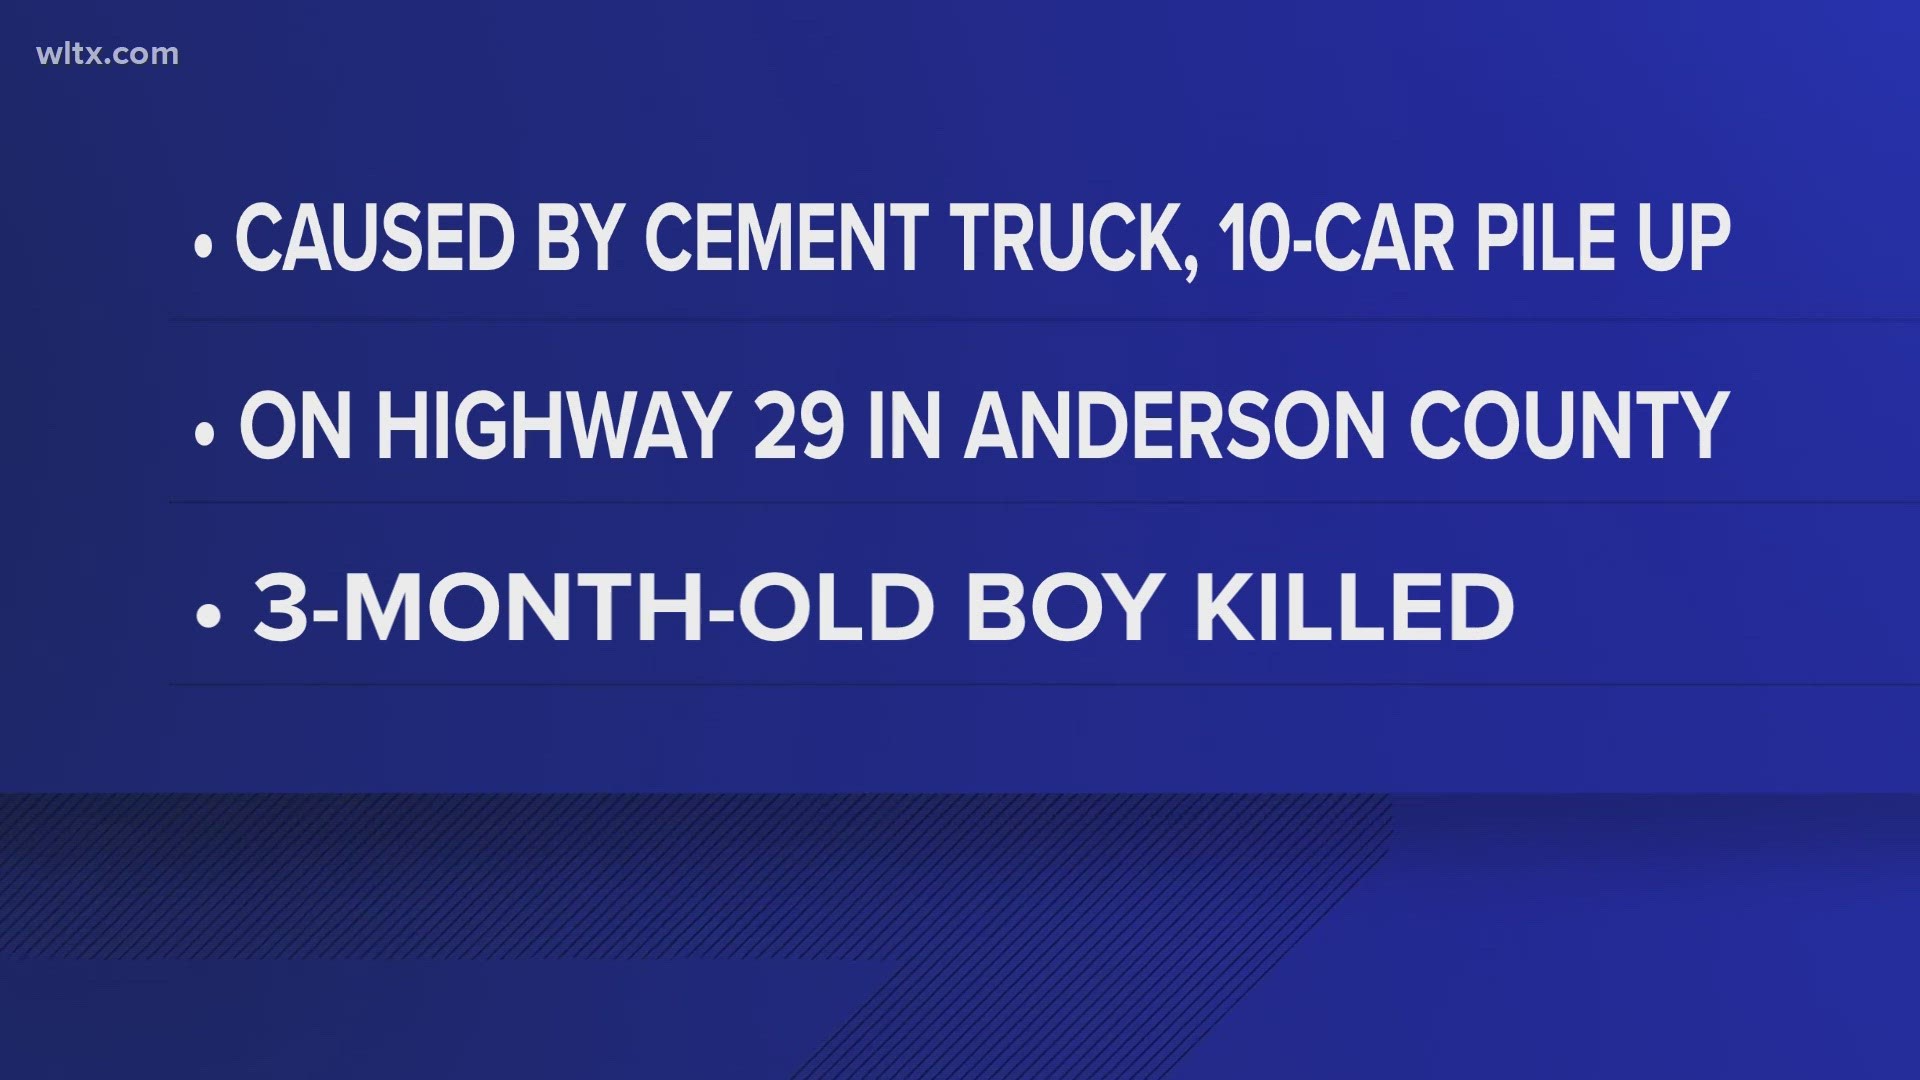 An infant has died following an Upstate South Carolina crash involving a cement truck and several other vehicles on Thursday.